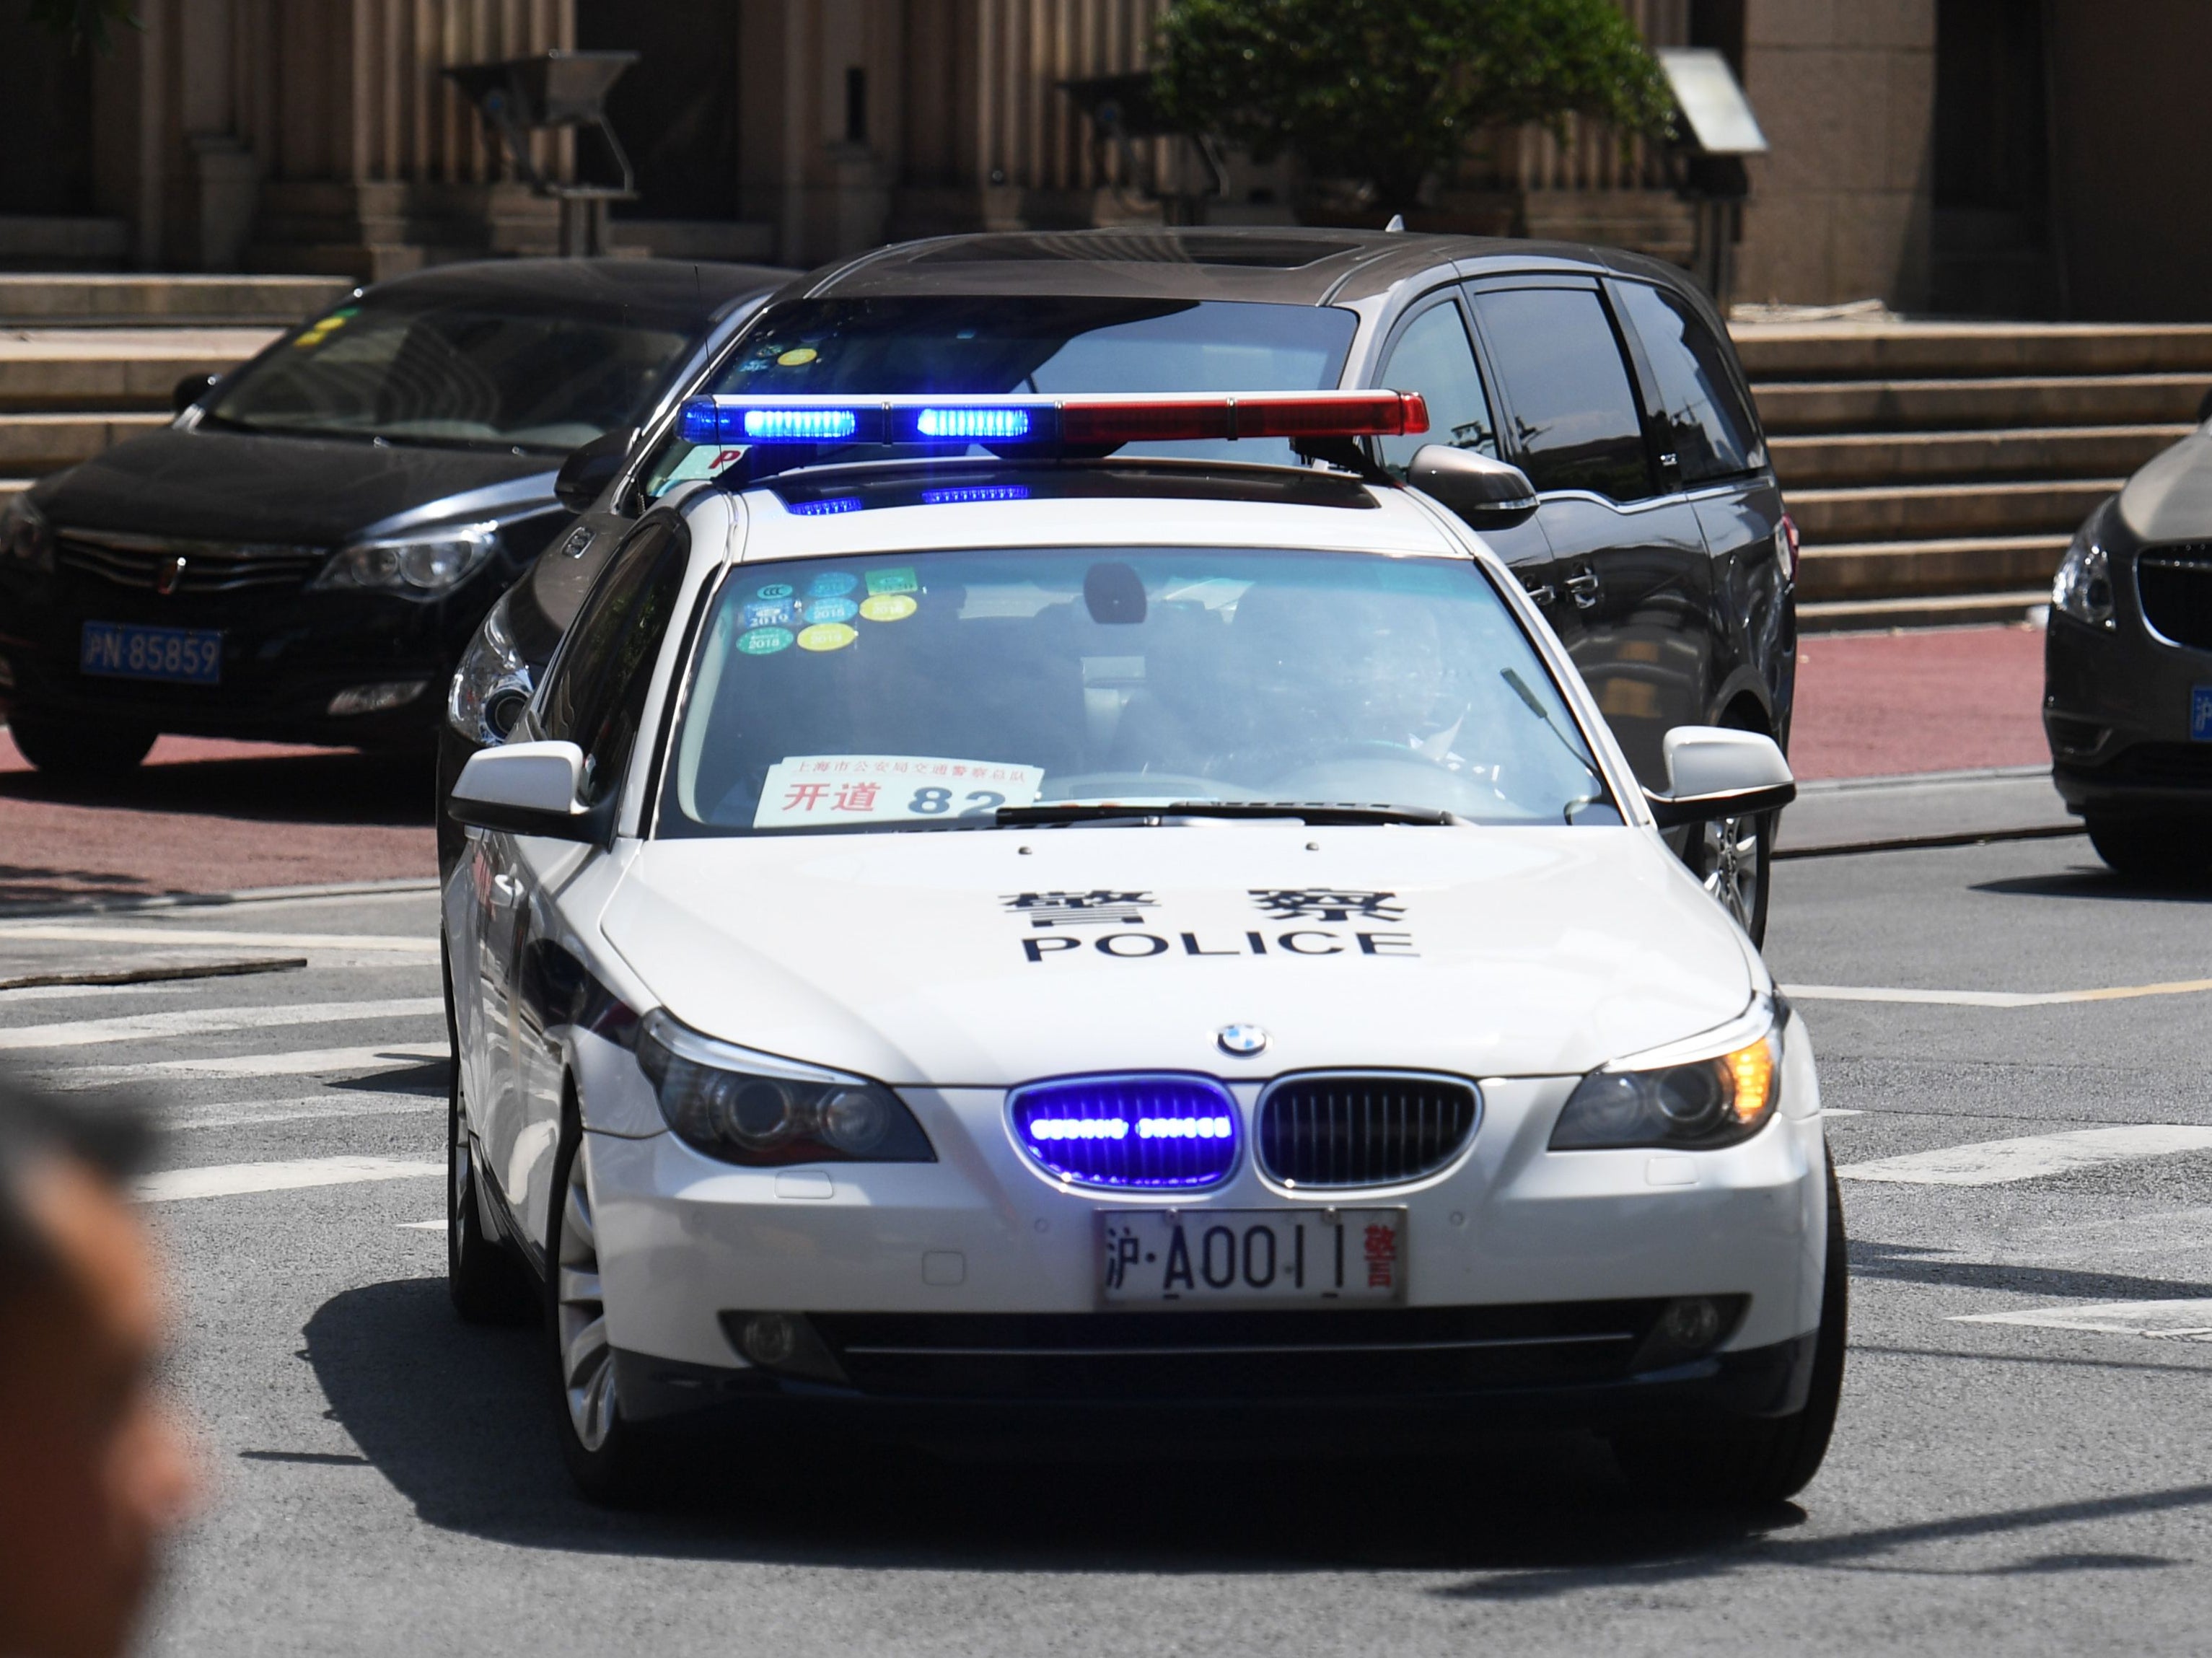 Representational: A police car in Shanghai on 30 July 2019